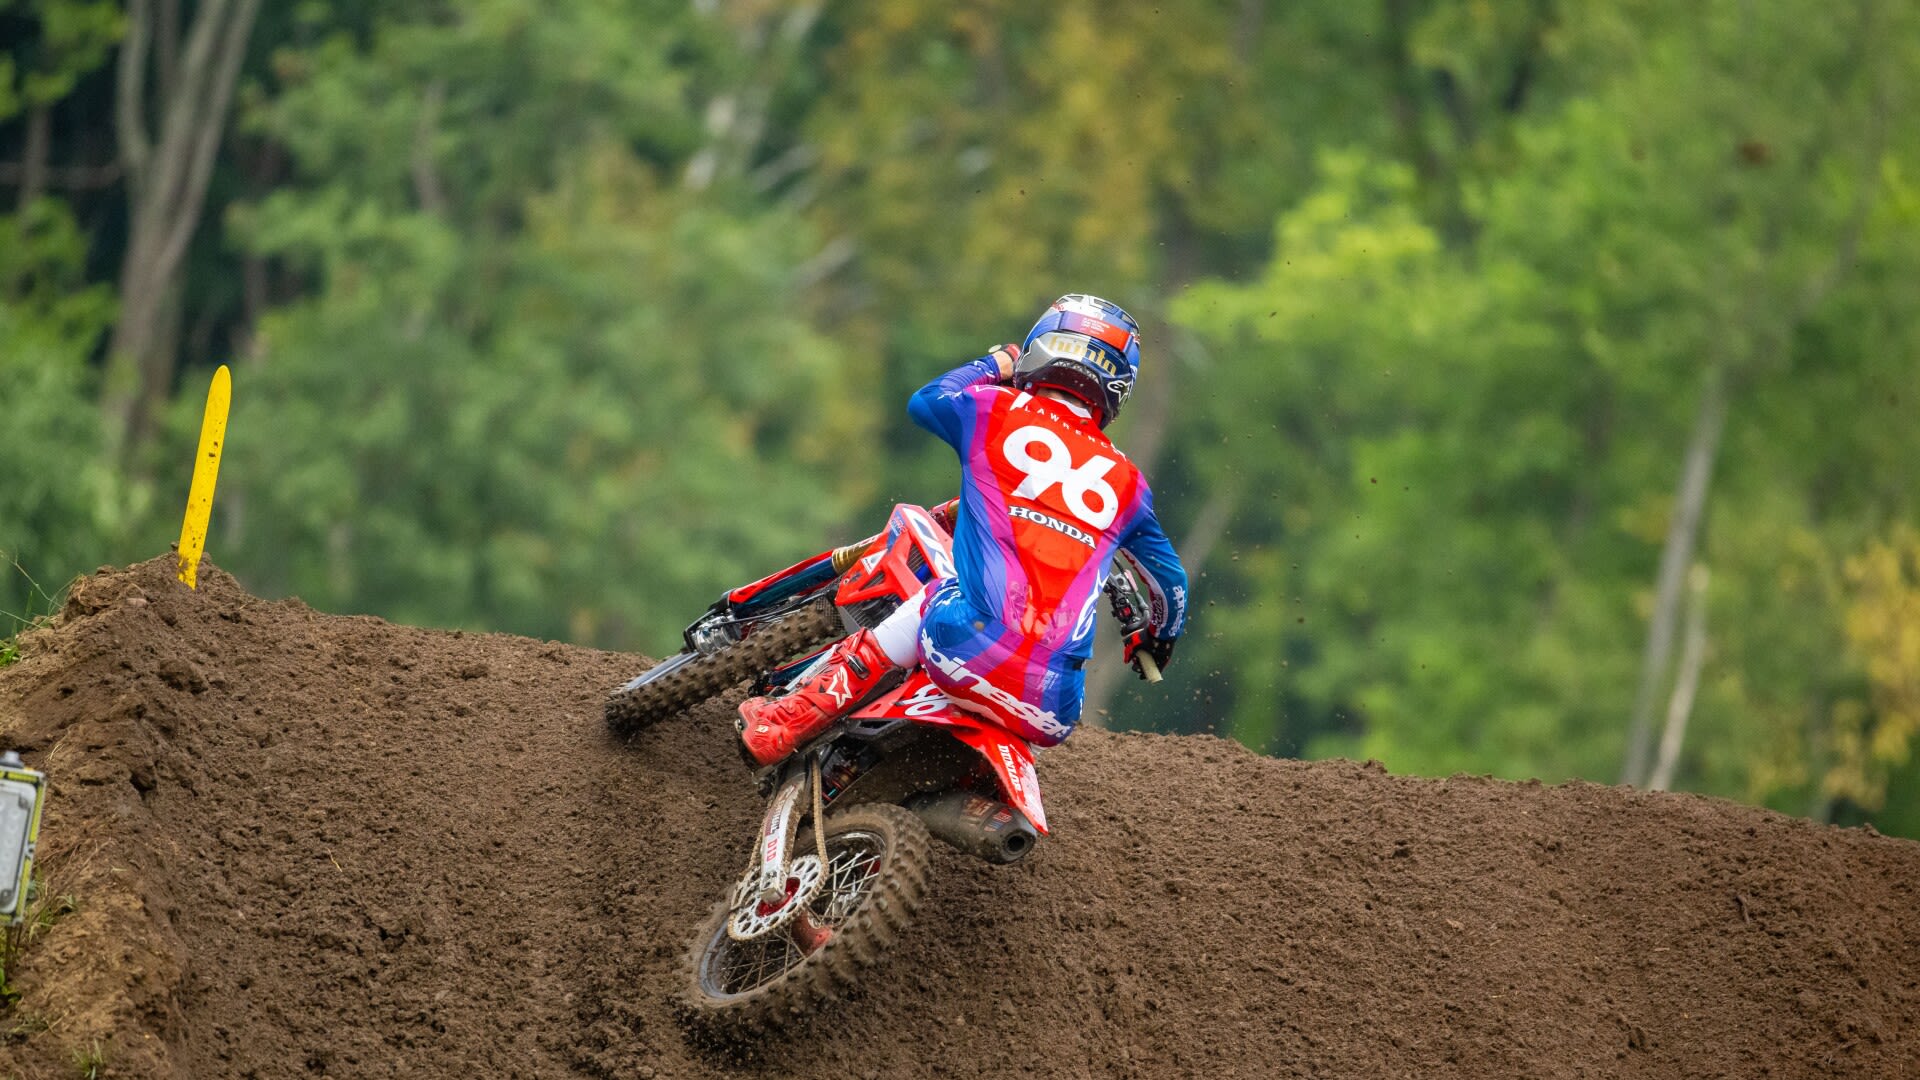 Live Pro Motocross Round 8 updates from Washougal: Hunter Lawrence sets the pace in qualification